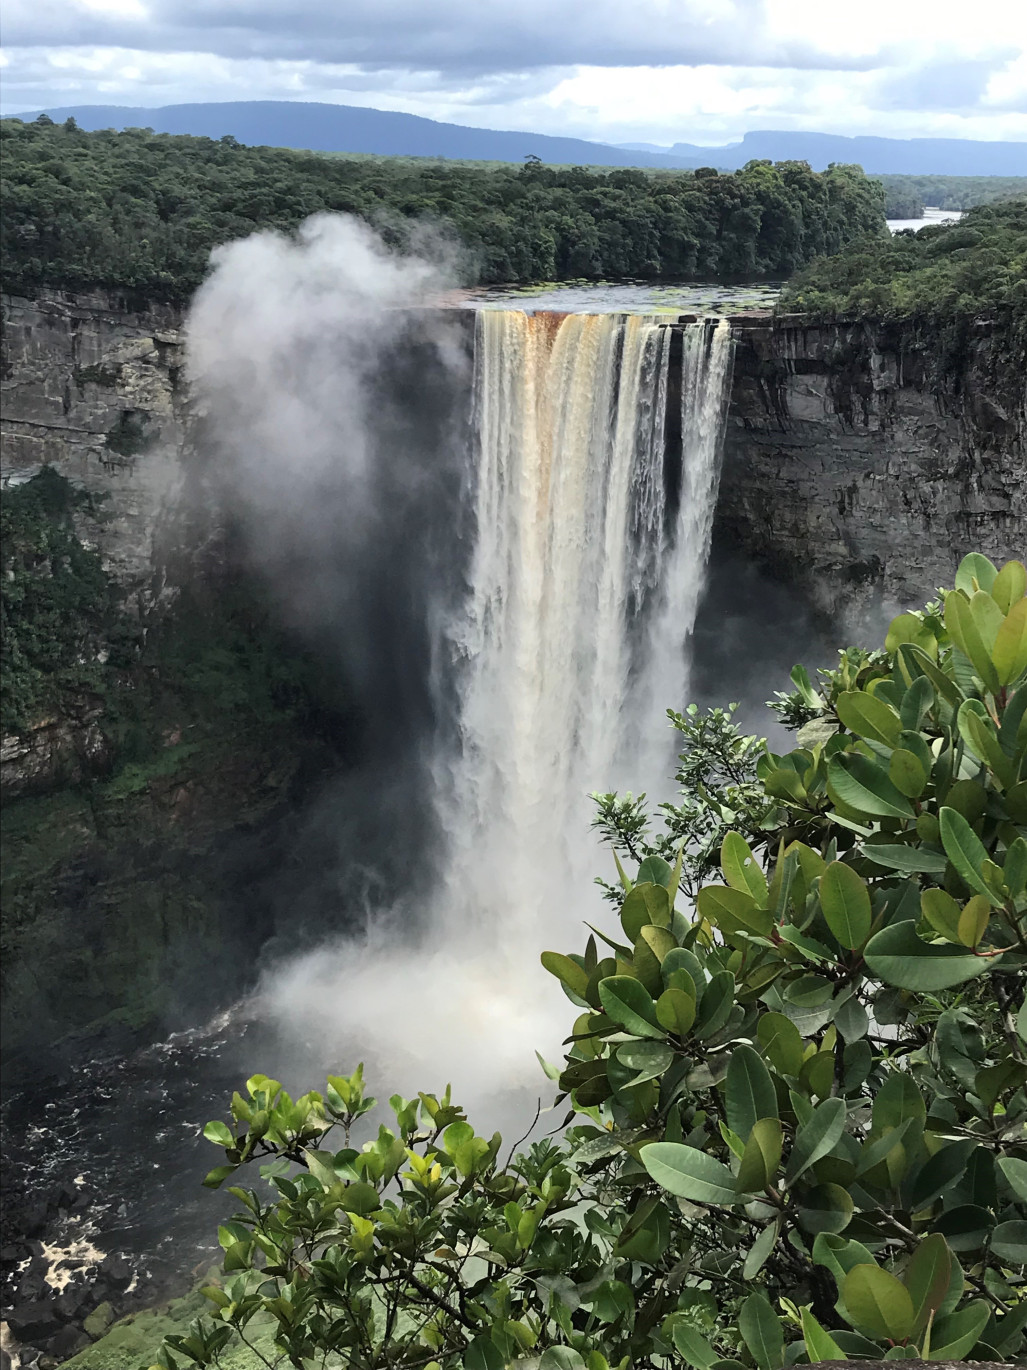 We will fly to the interior of the country, where we&rsquo;ll make a stop at the famous Kaieteur Falls, the world&rsquo;s largest single drop waterfall